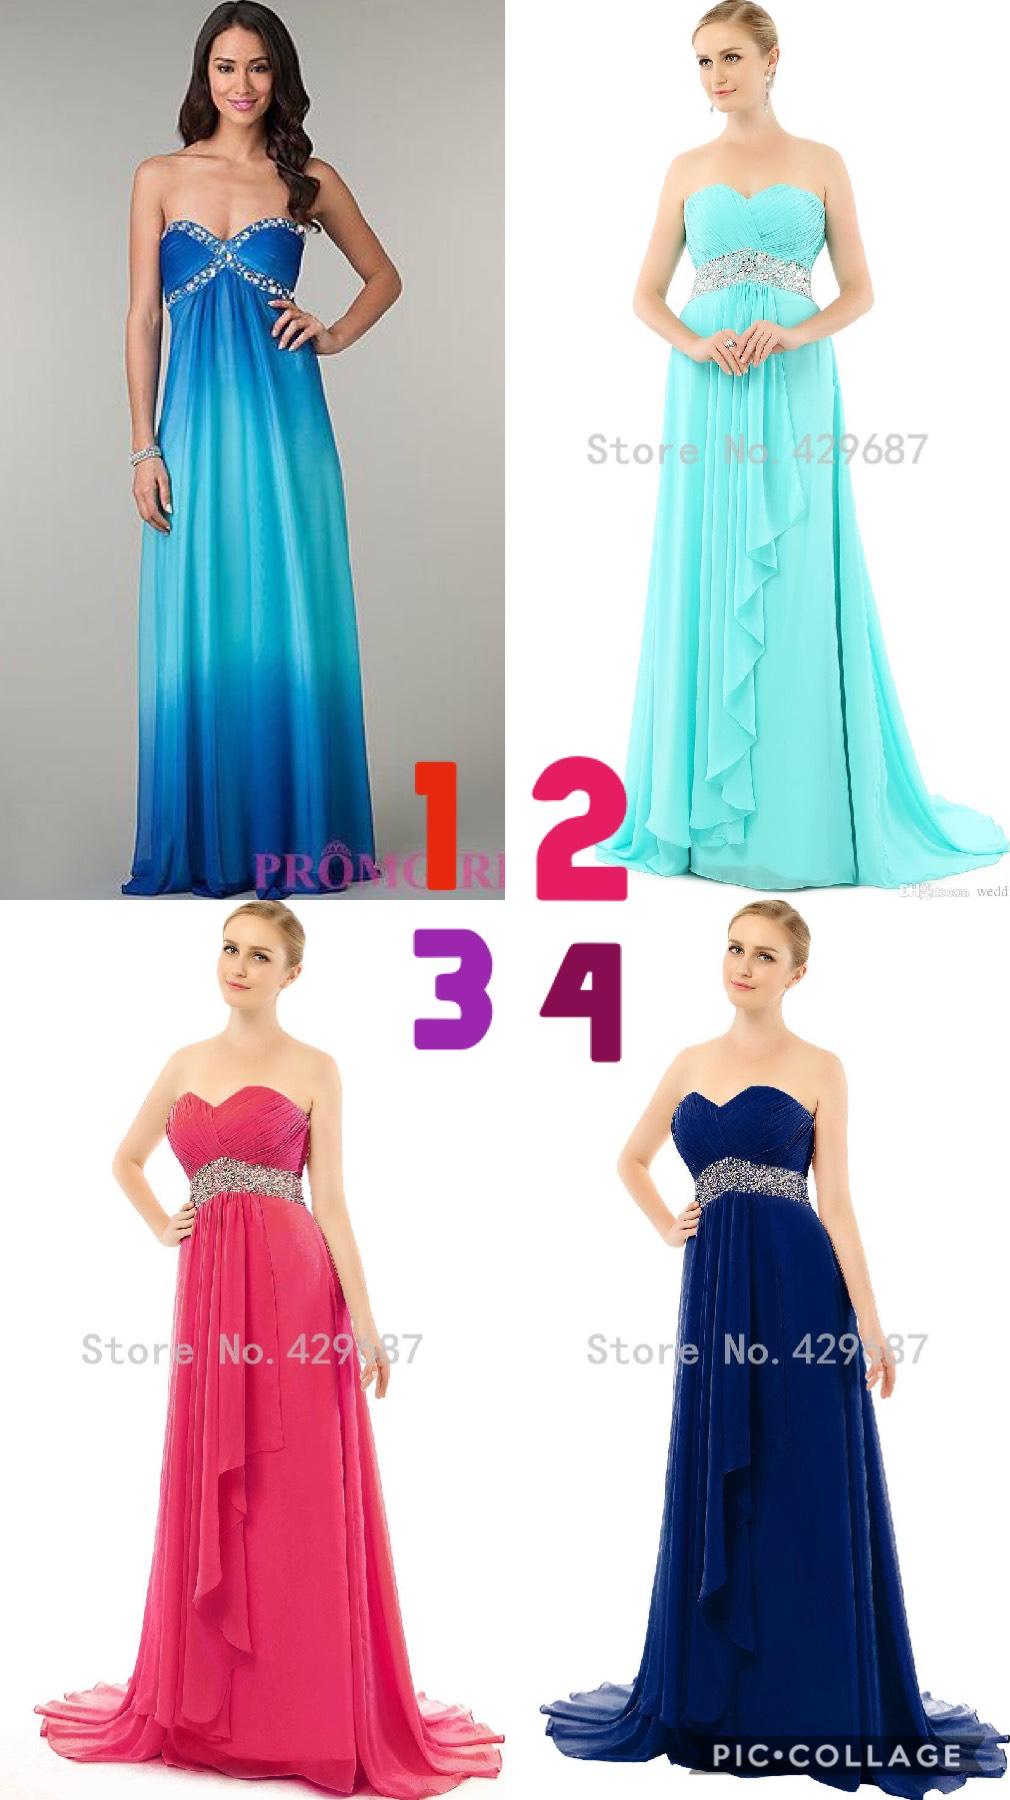 Which dress should I get???? Comment down below either 1, 2, 3, or 4!!!!!!!